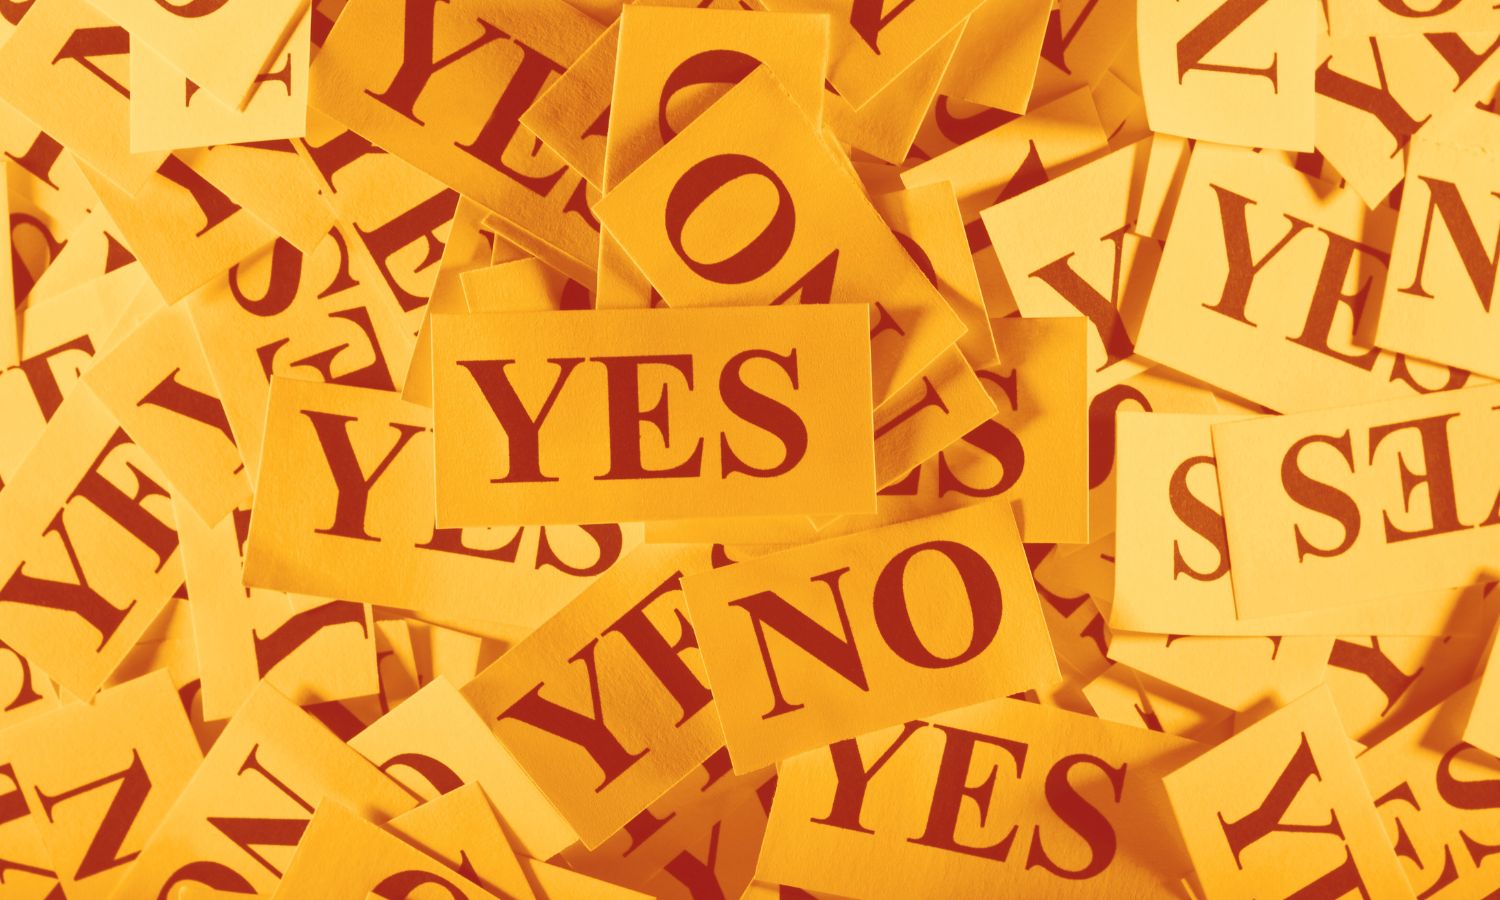 Image of papers with the words yes and no on them to illustrate an article about the indigenous voice to parliament vote